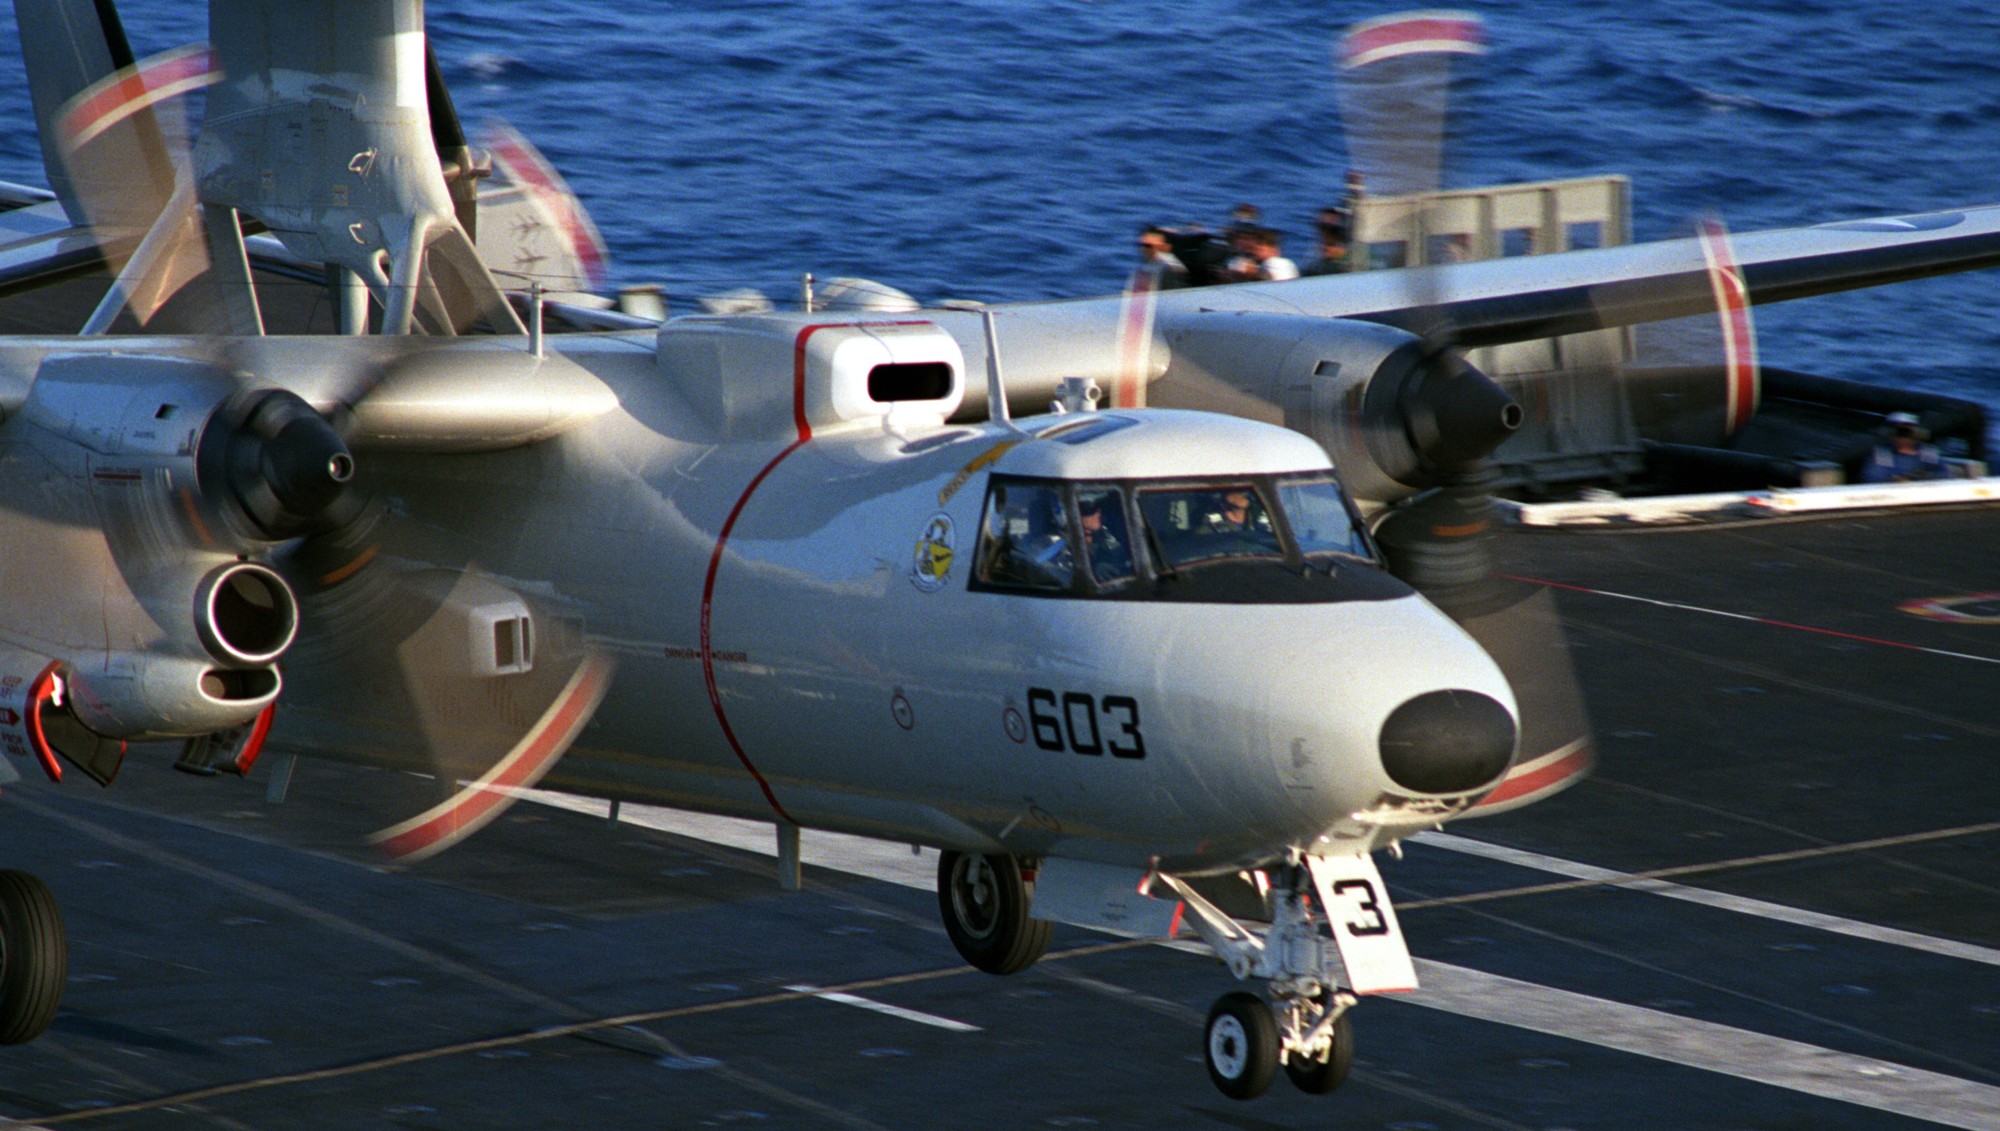 vaw-88 cottonpickers carrier airborne early warning squadron us navy reserve cvwr-30 grumman e-2c hawkeye 11